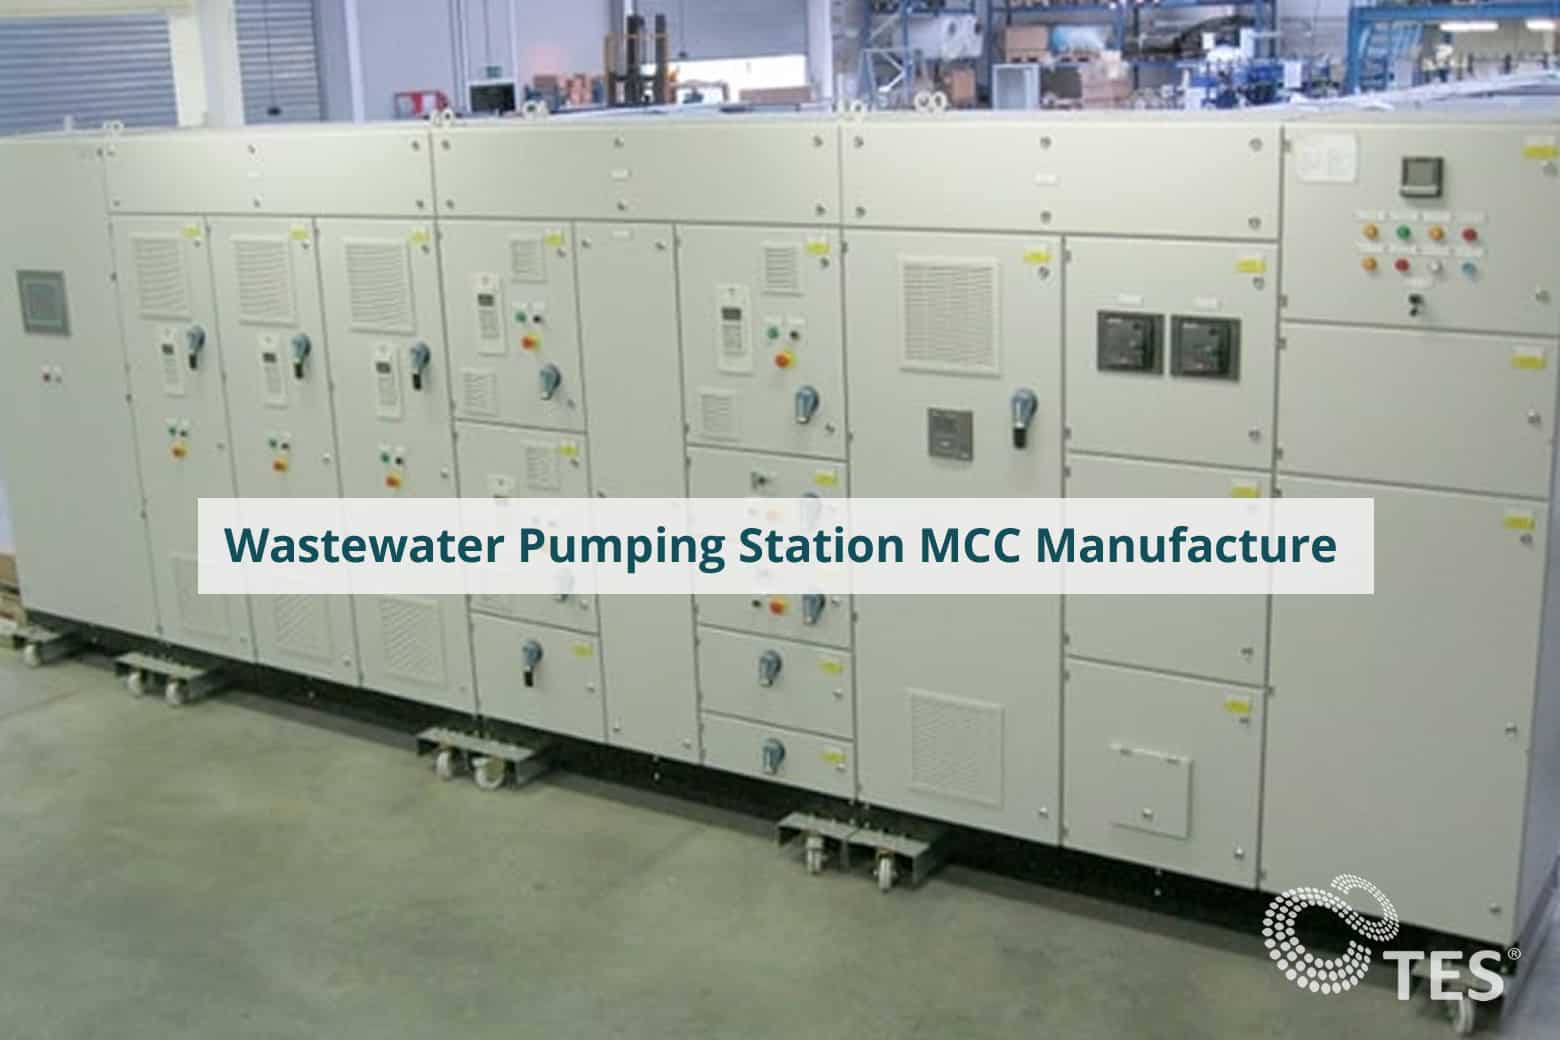 Wastewater Pumping Station MCC Manufacture